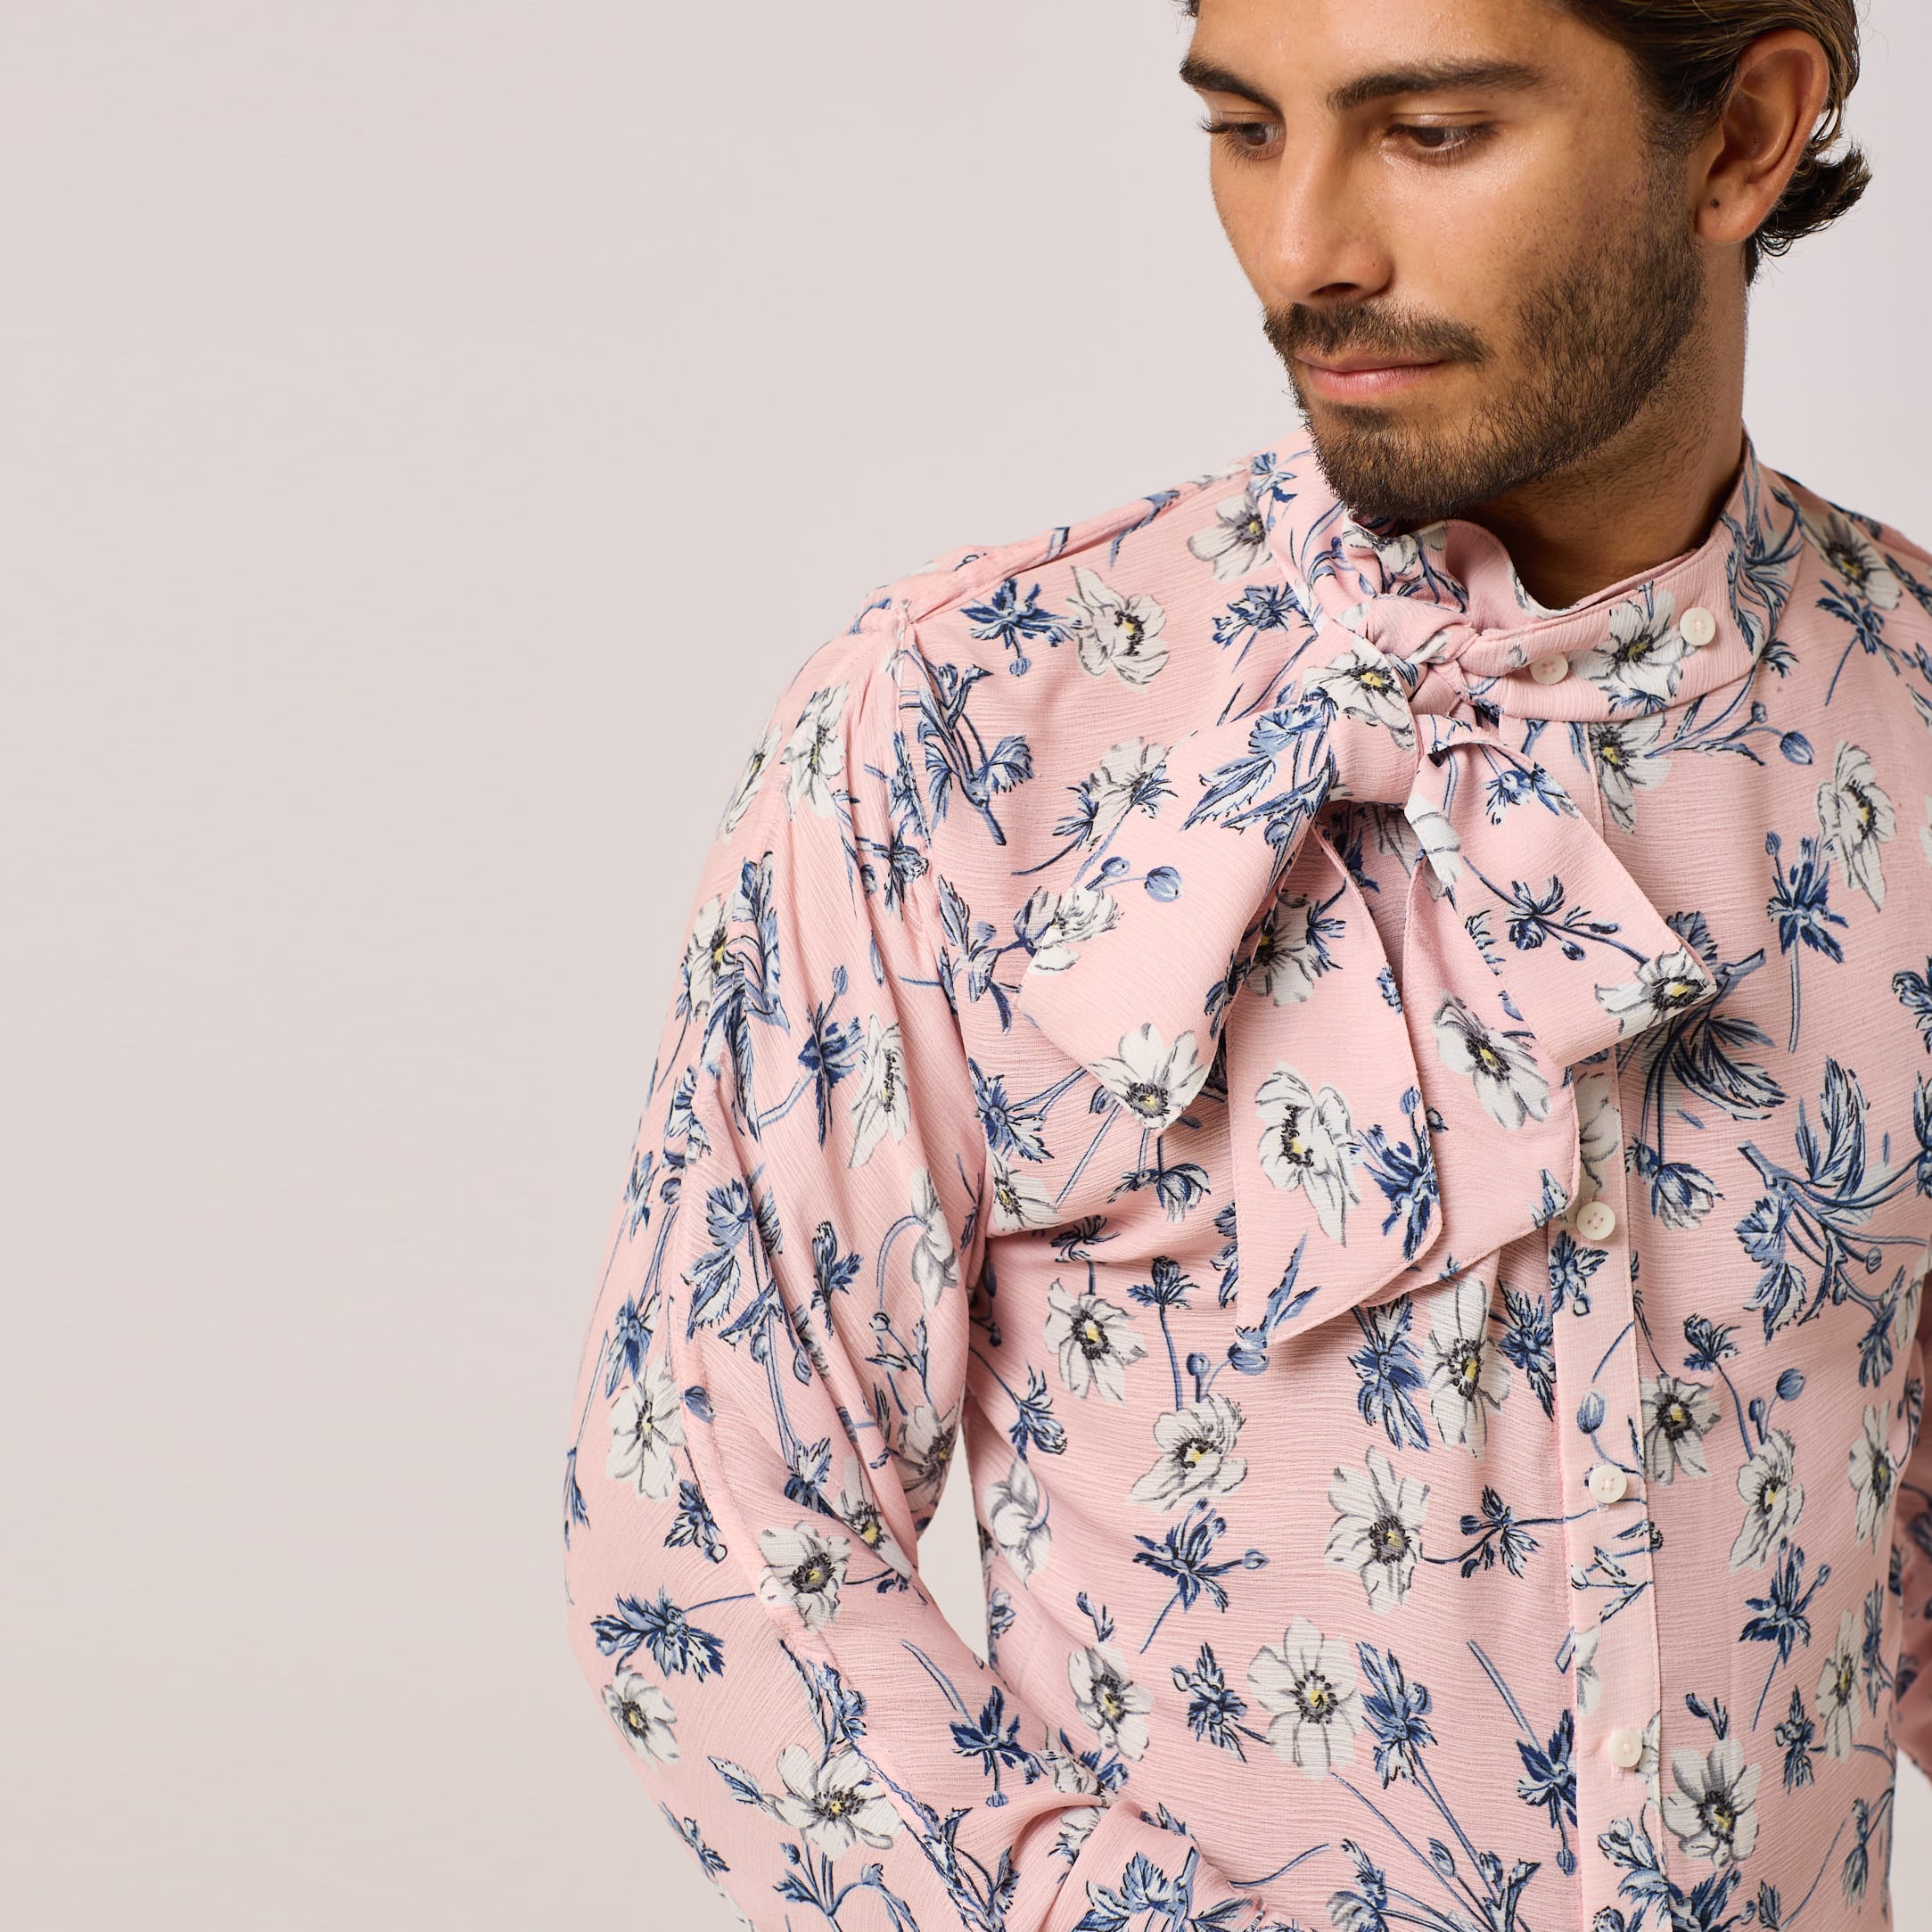 ZERØ London - Front view, Pink floral long sleeve mens zero waste shirt designed & made in London